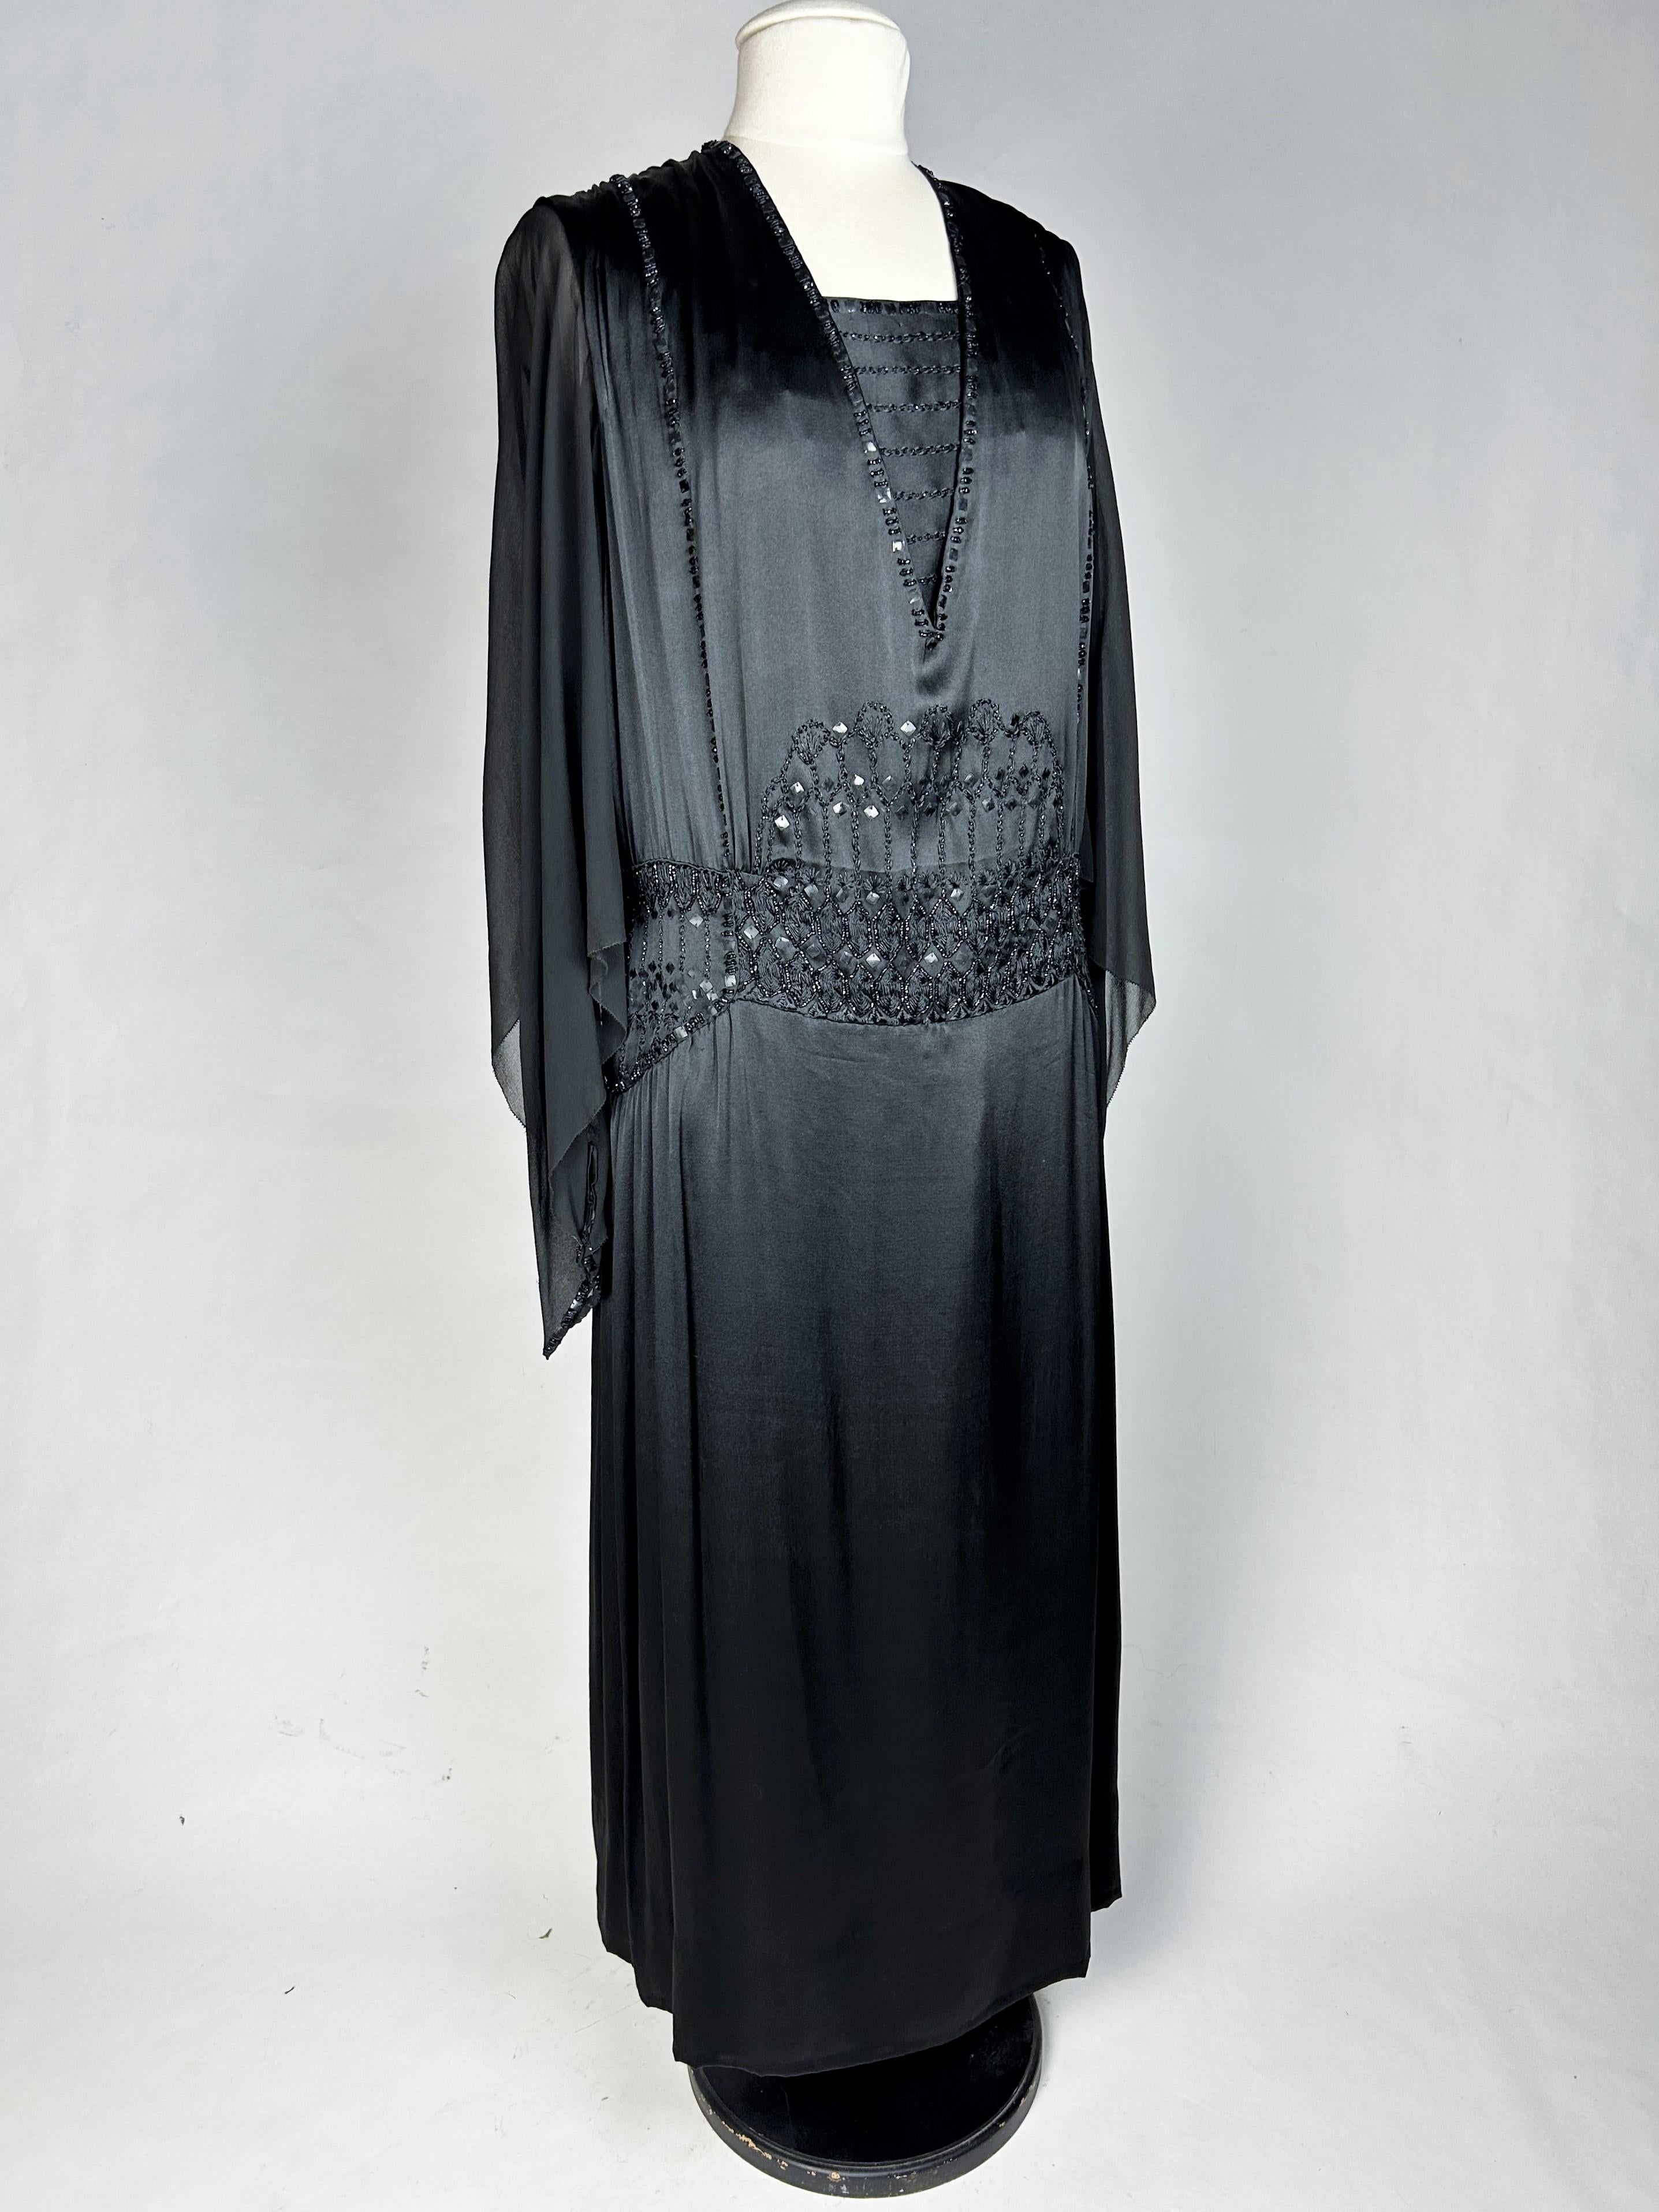 Long evening dress in embroidered satin and chiffon - Paris Circa 1920 For Sale 1